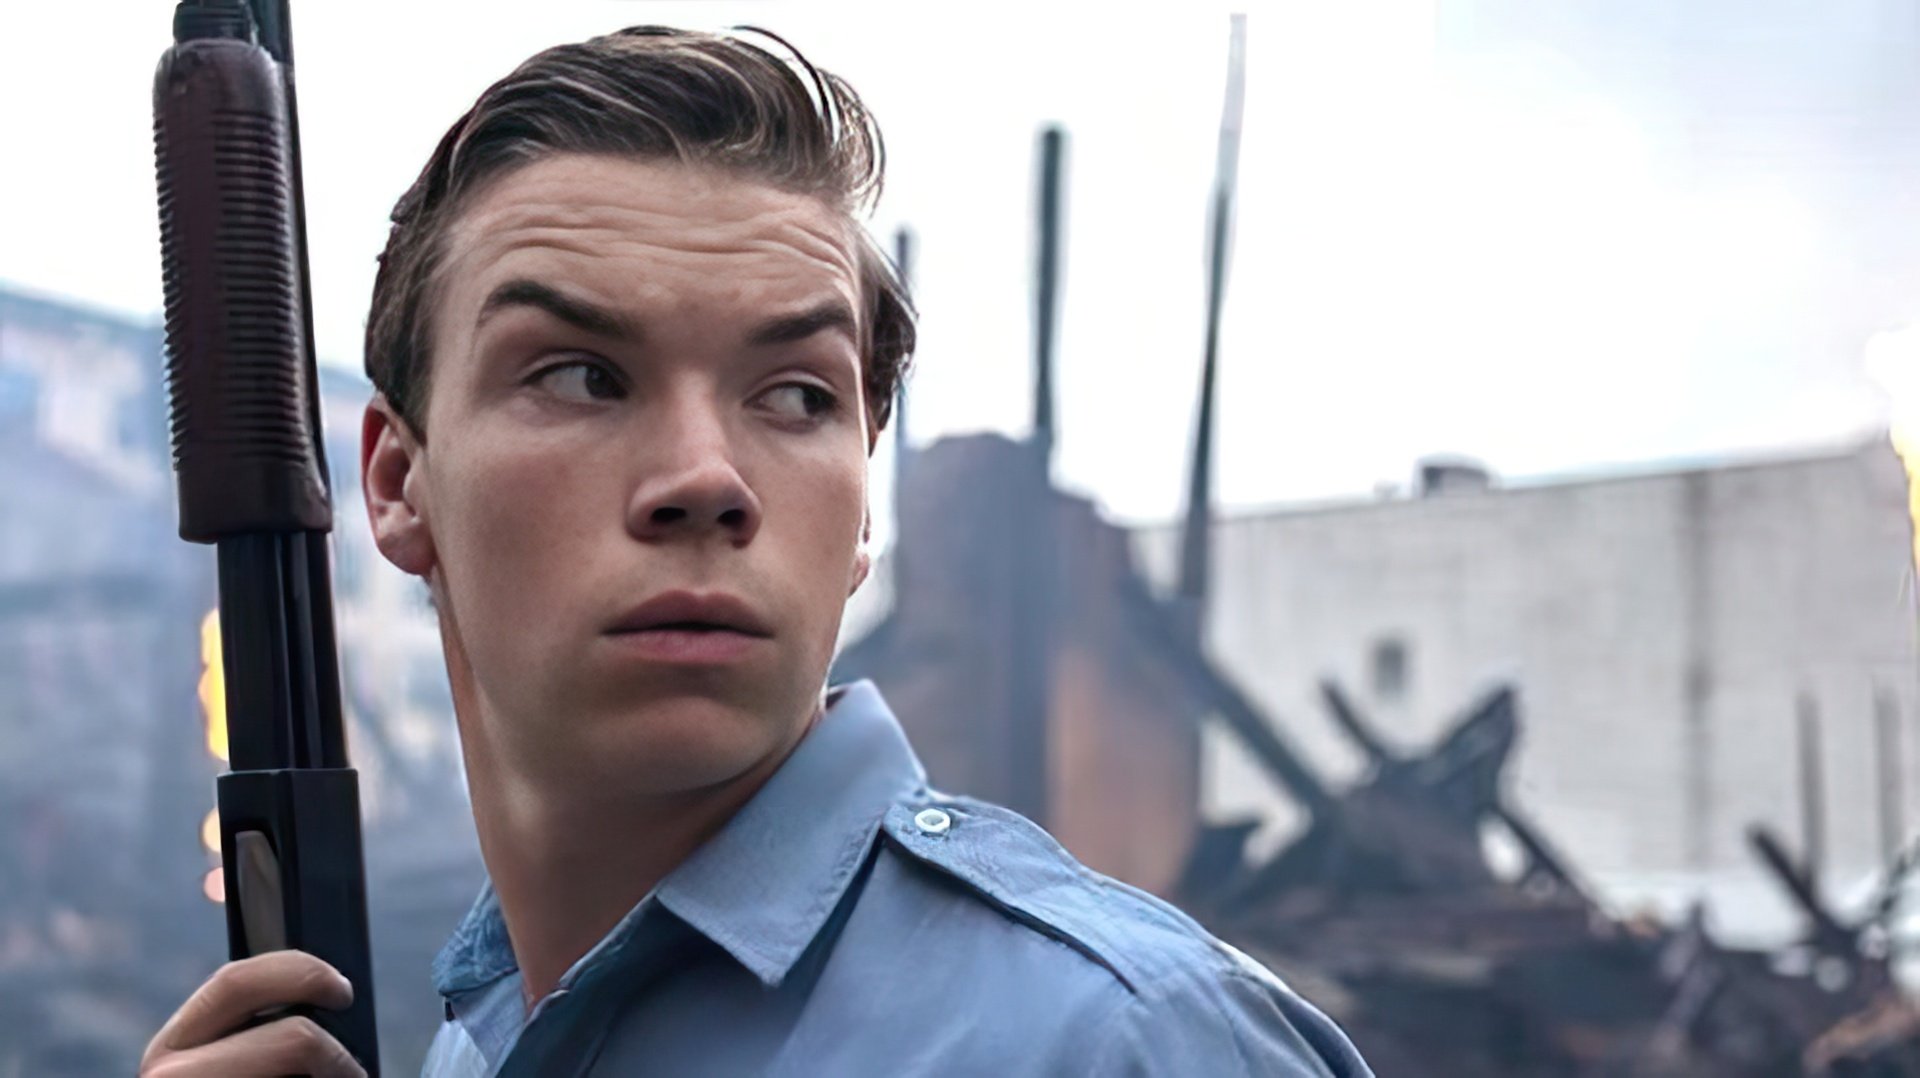 Will Poulter and his distinctive eyebrows